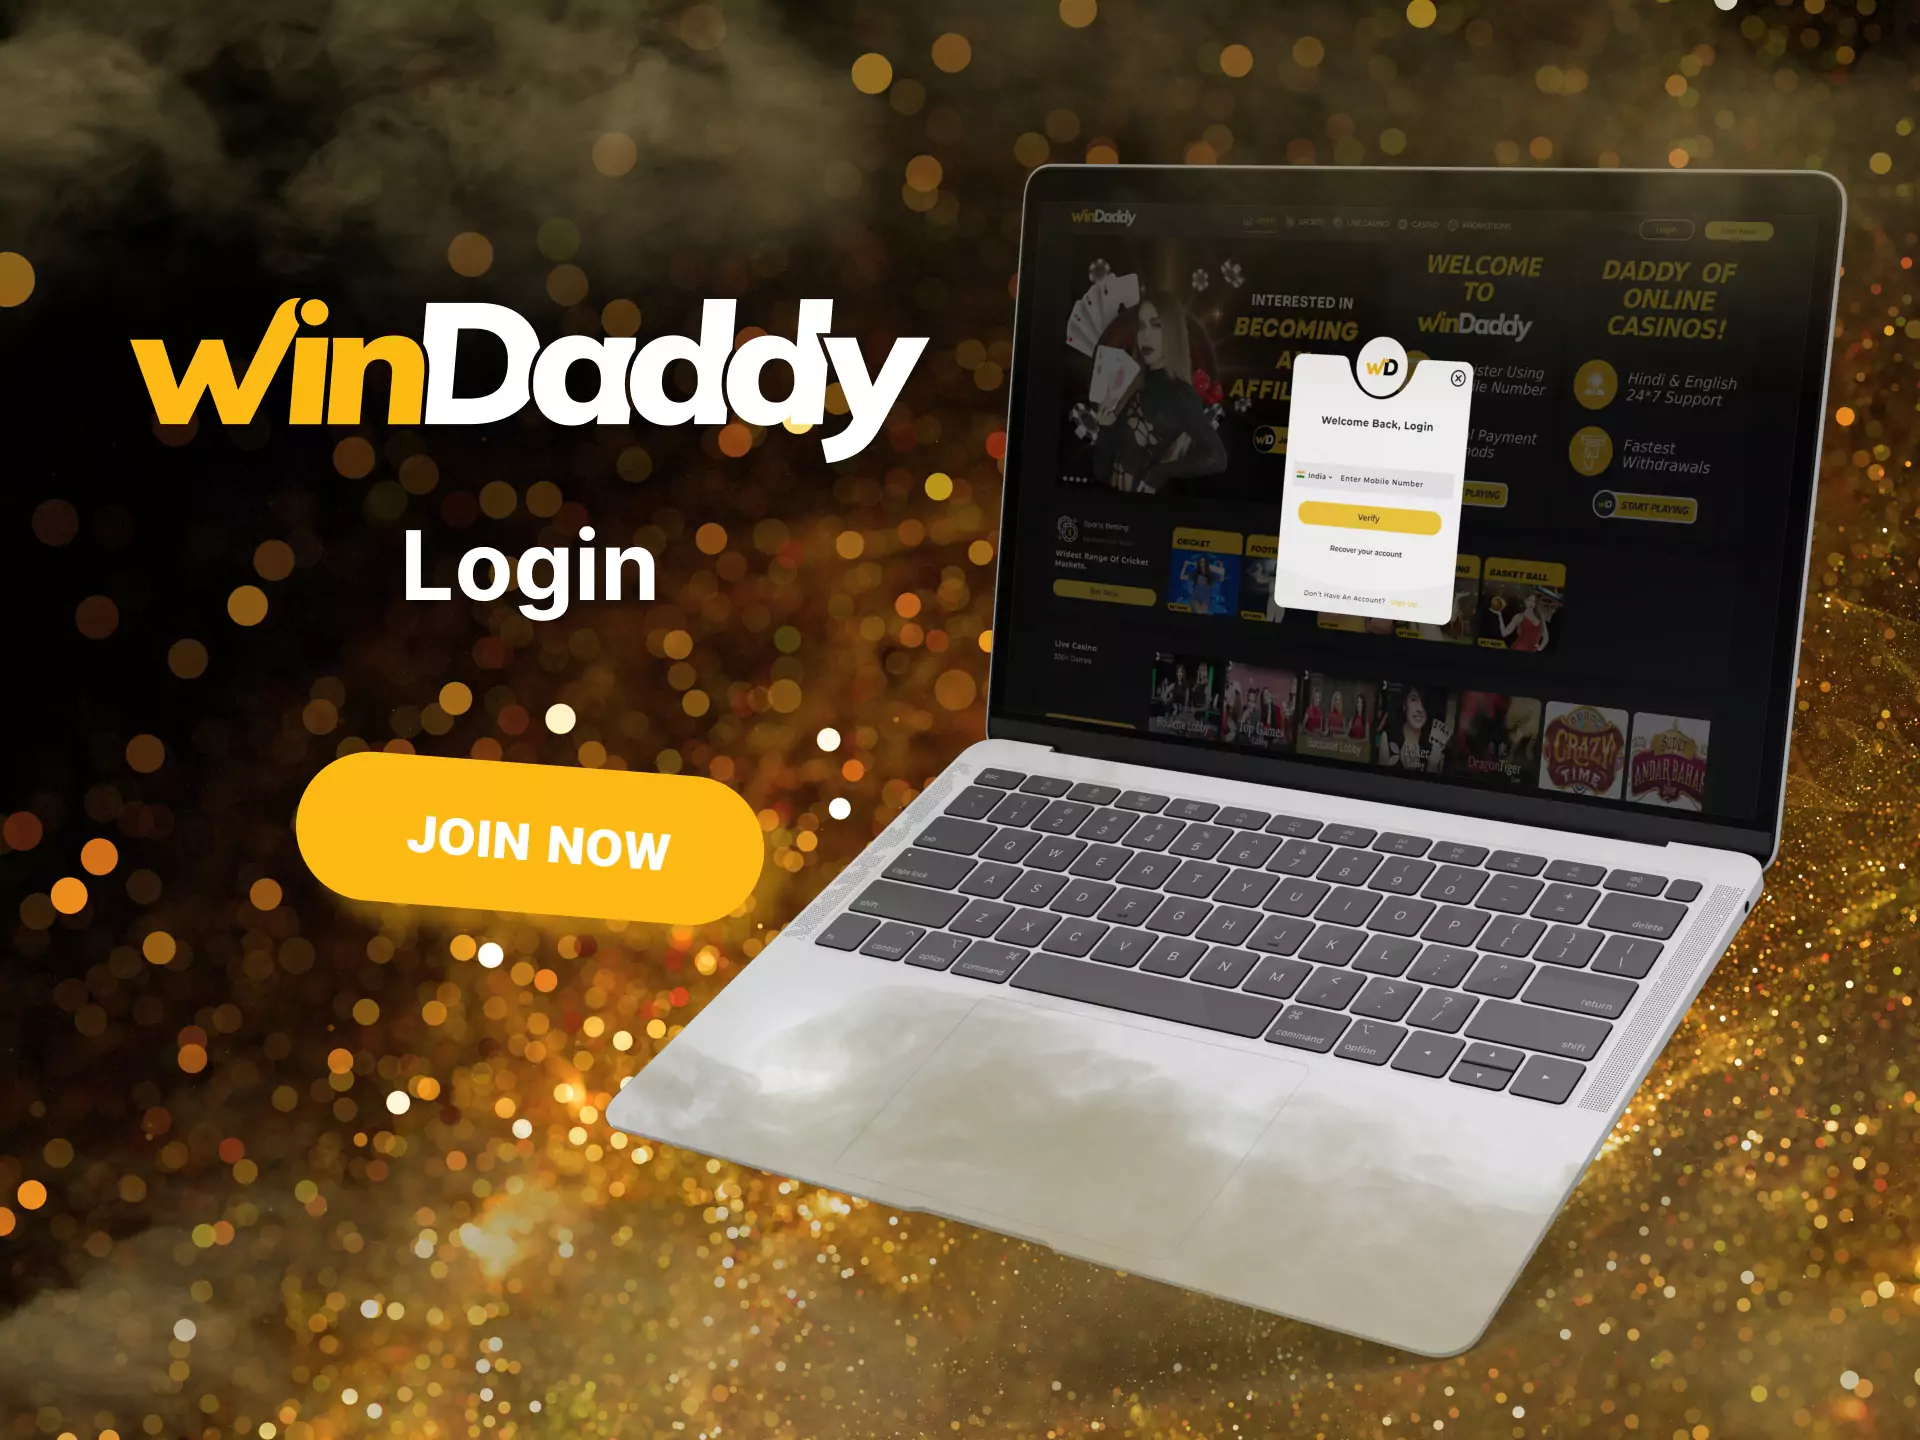 Log in to the Windaddy website to use all the features.